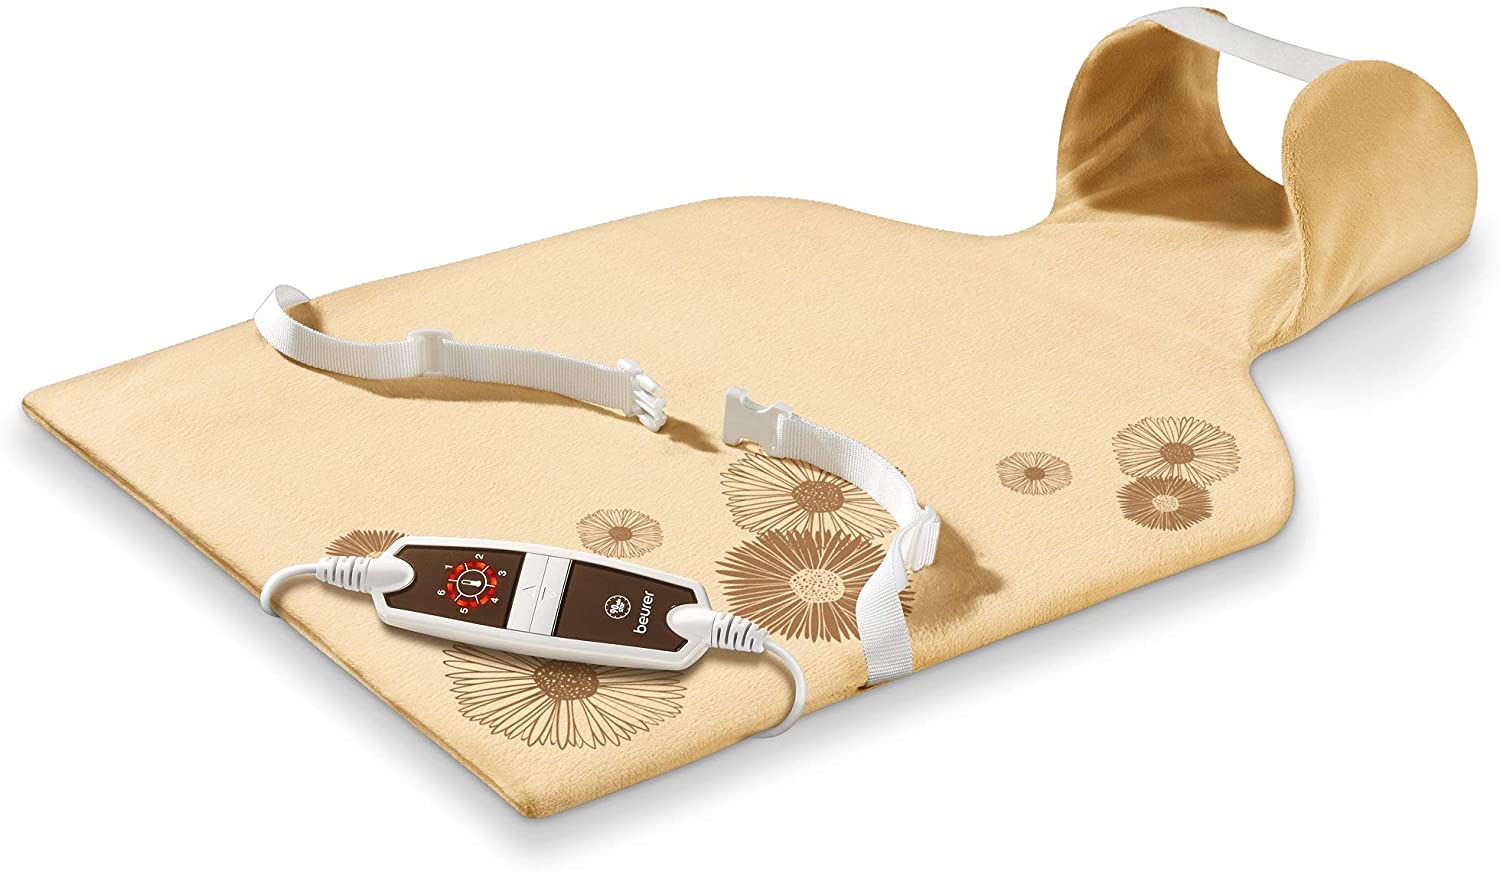 Beurer HK 58 Cosy Back/Neck Heating Pad Made of Fleece Fibre 6 Temperature Settings Quick Heating